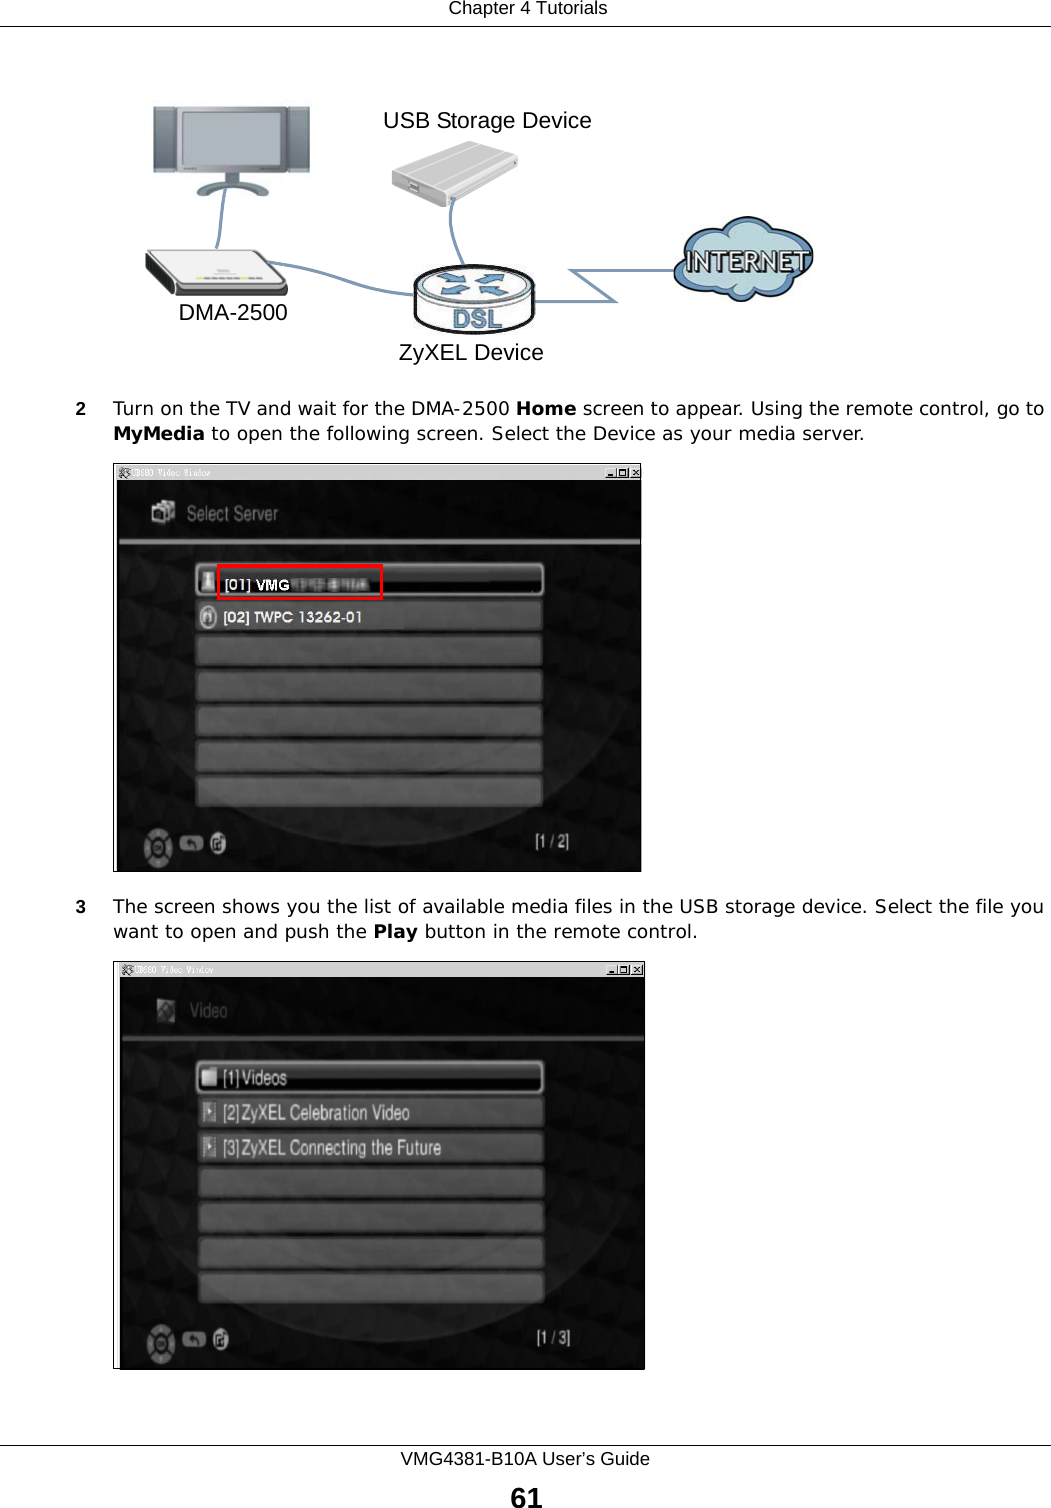  Chapter 4 TutorialsVMG4381-B10A User’s Guide61Tutorial: Media Server Setup (Using DMA)2Turn on the TV and wait for the DMA-2500 Home screen to appear. Using the remote control, go to MyMedia to open the following screen. Select the Device as your media server.Tutorial: Media Sharing using DMA-25003The screen shows you the list of available media files in the USB storage device. Select the file you want to open and push the Play button in the remote control.Tutorial: Media Sharing using DMA-2500 (2)DMA-2500ZyXEL DeviceUSB Storage Device